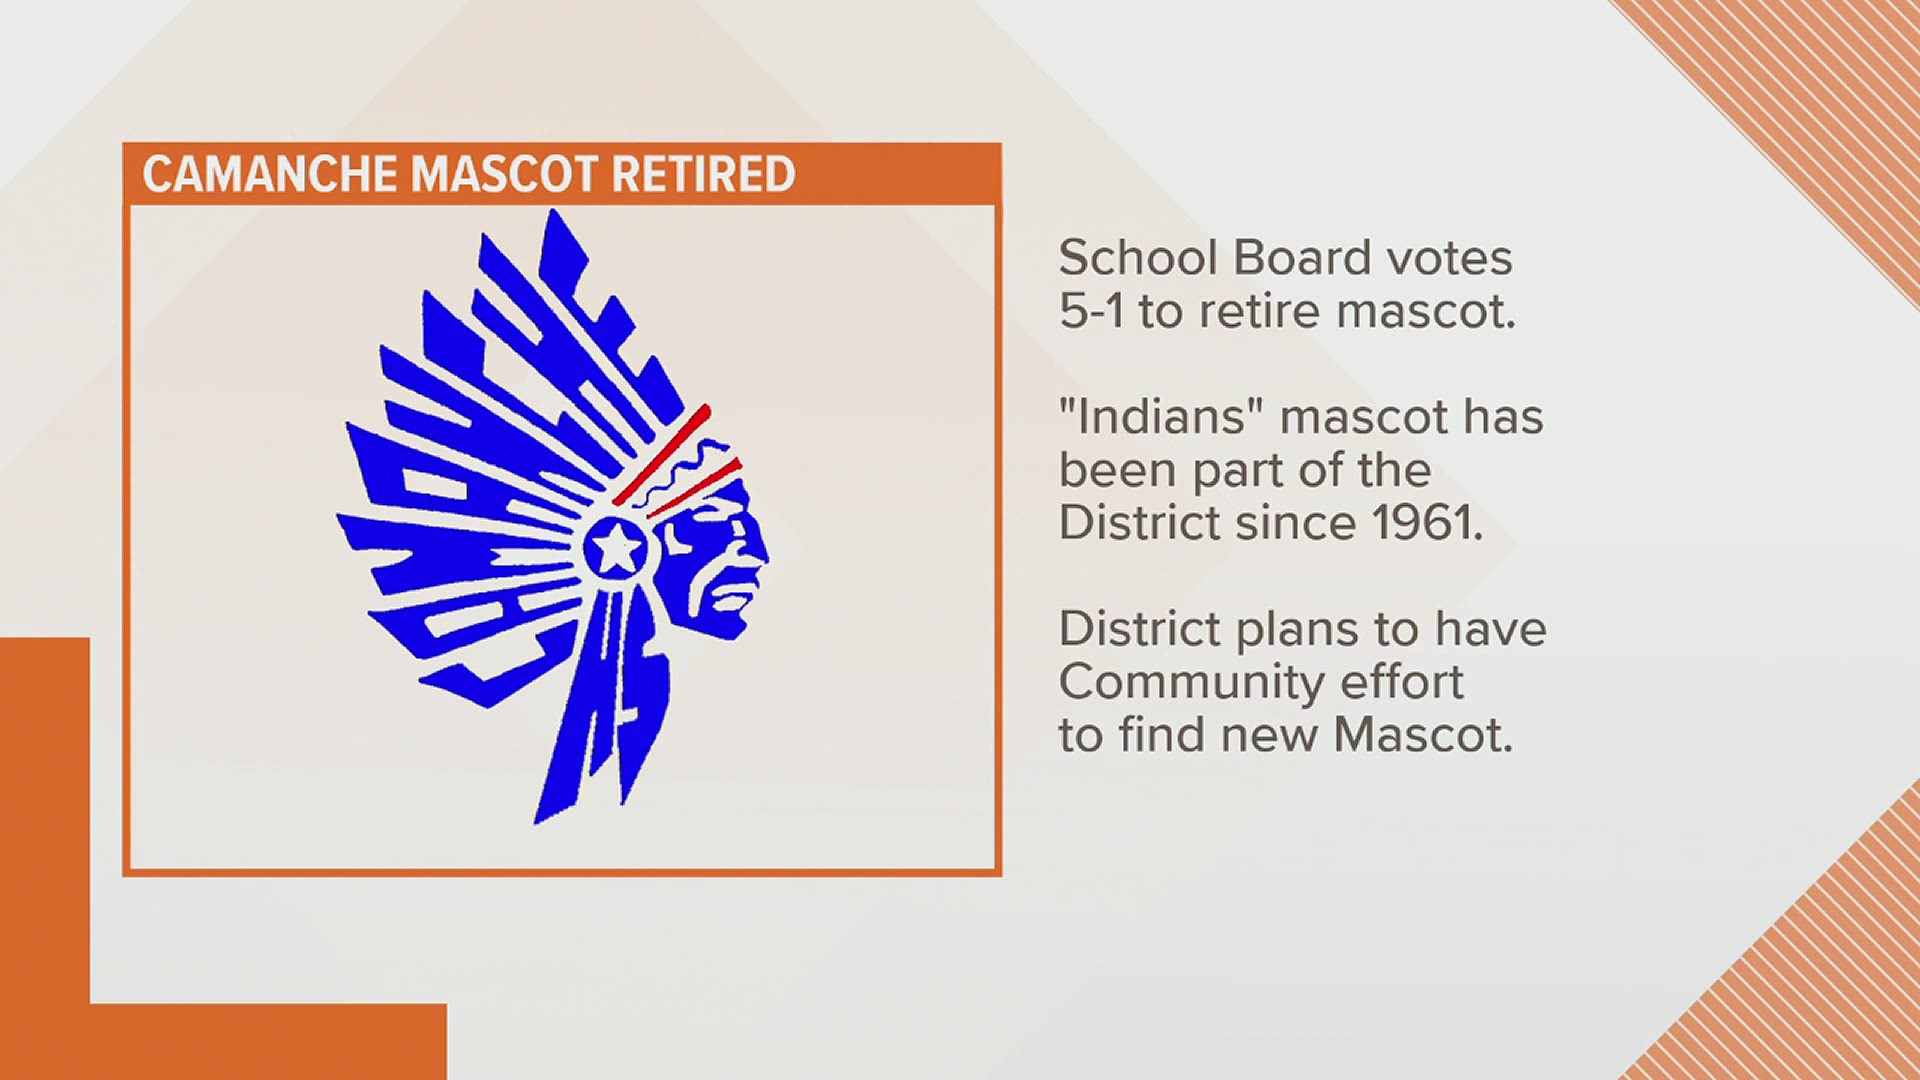 Camanche has used the "Indians" mascot for more than 60 years.